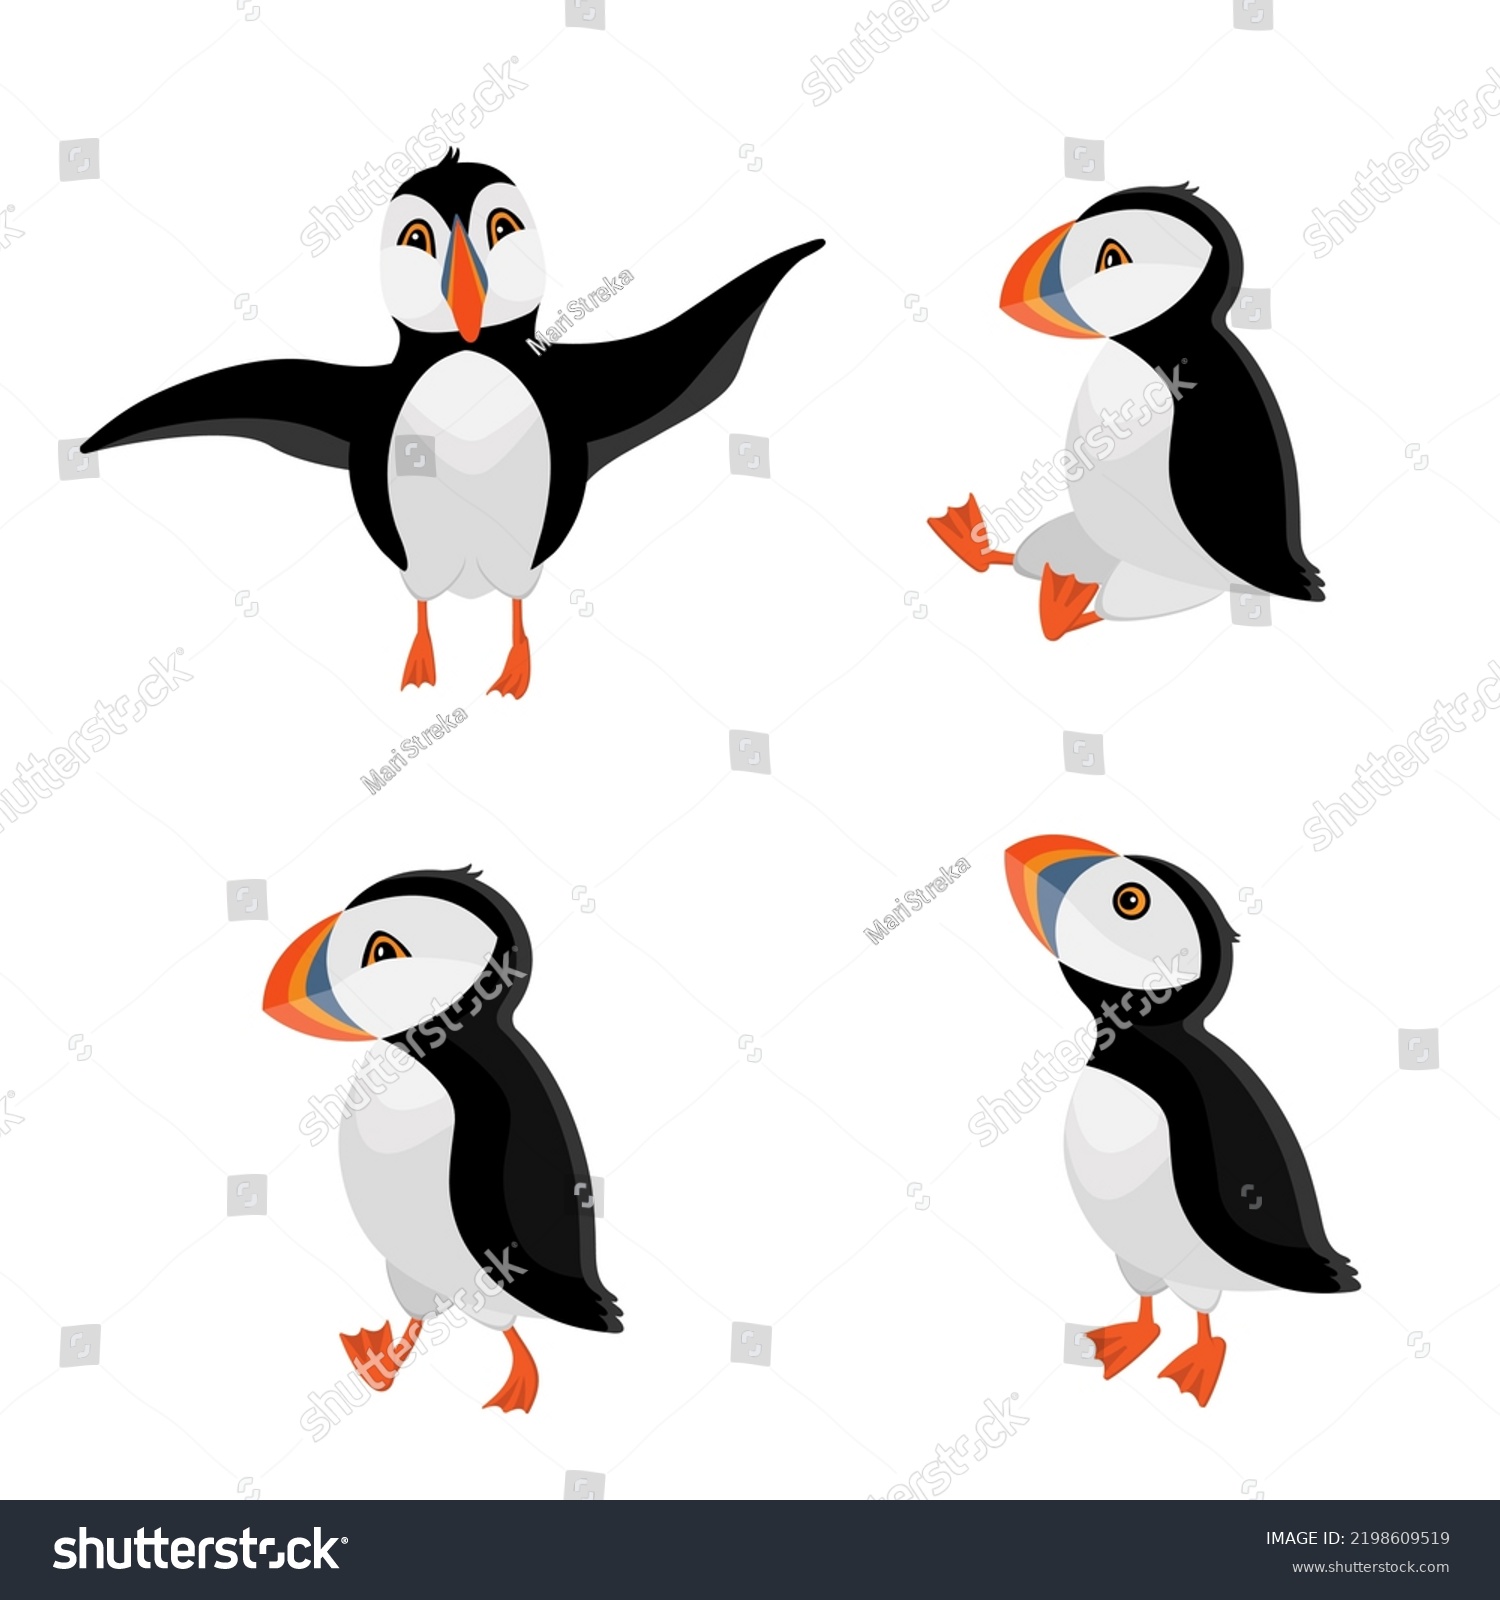 SVG of Set of puffins. Flying, standing, sitting, walking. Drawn in cartoon style. Vector illustration for designs, prints and patterns. svg